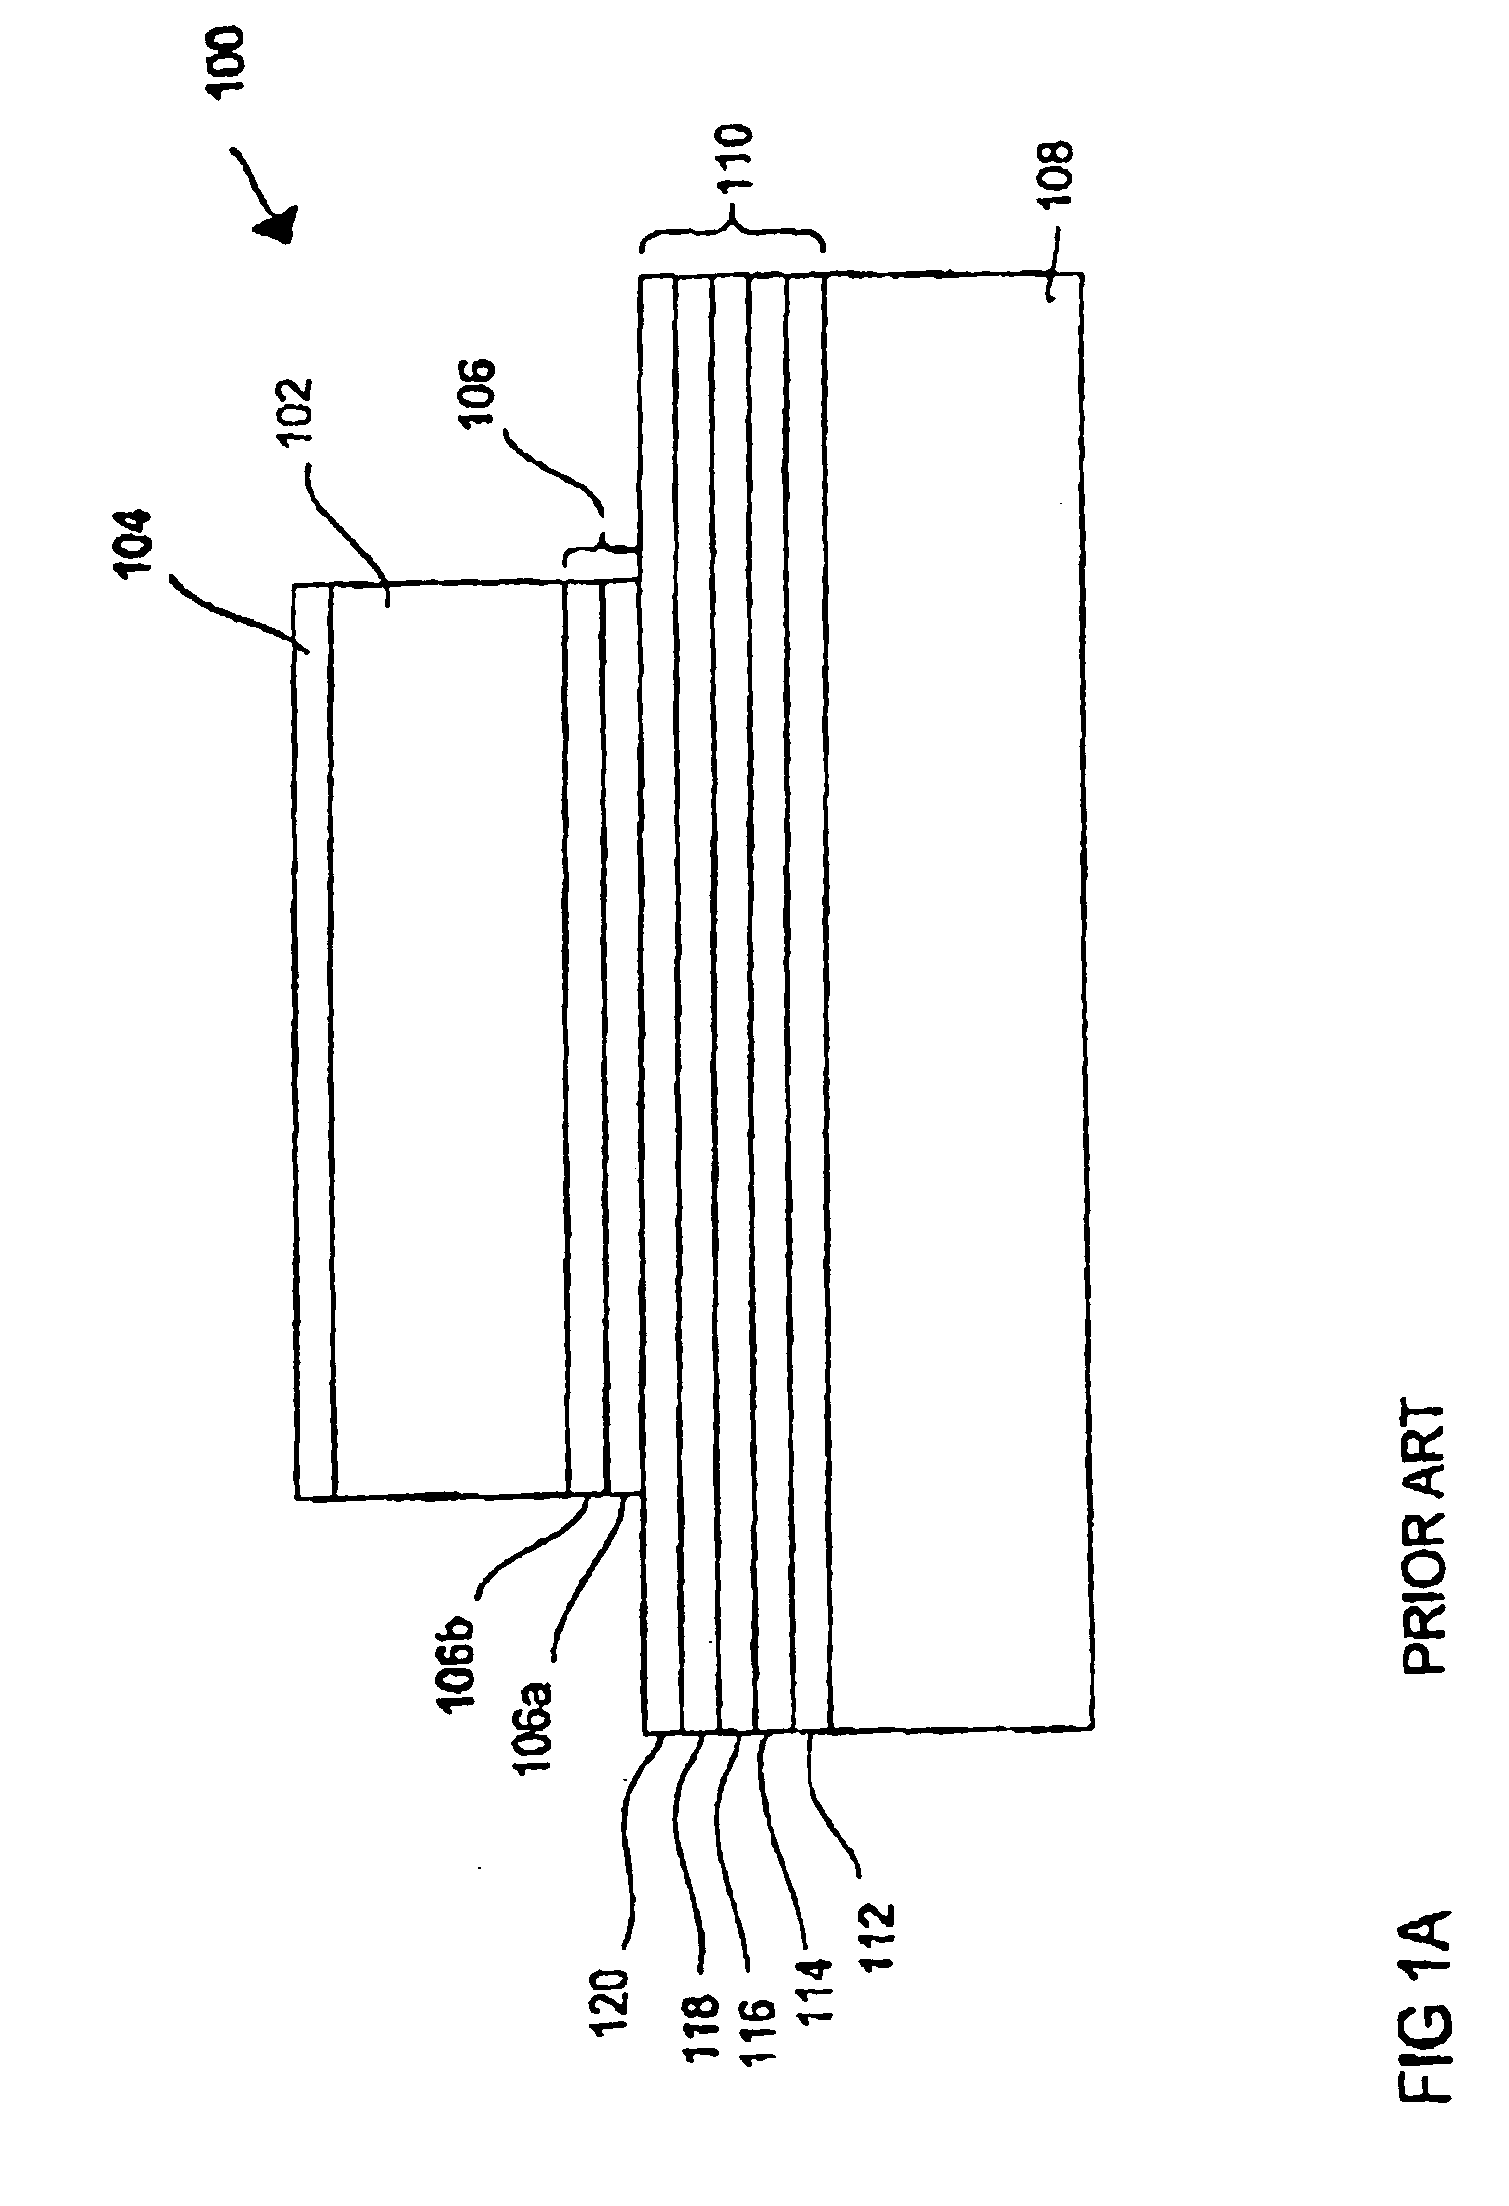 Acoustic reflector for a BAW resonator providing specified reflection of both shear waves and longitudinal waves